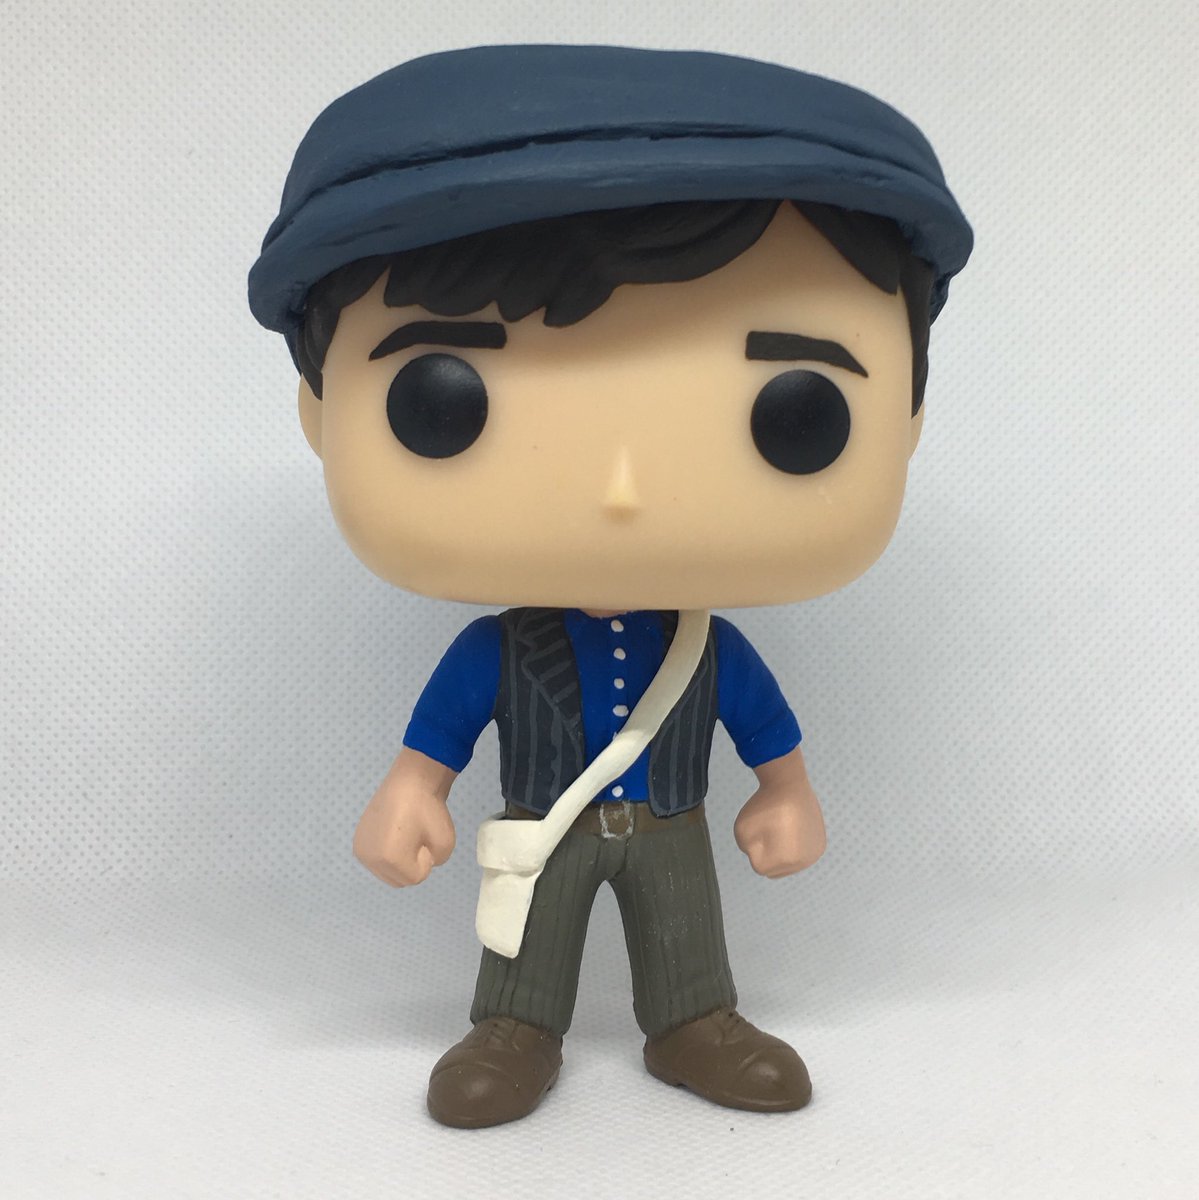 Hamilpop Custom Funko Pop S I Ve Got A New Design For Jeremymjordan As Jack Kelly In Newsies Both The Stage Version And Christian Bale In The Movie Edition Are Available Made To Order